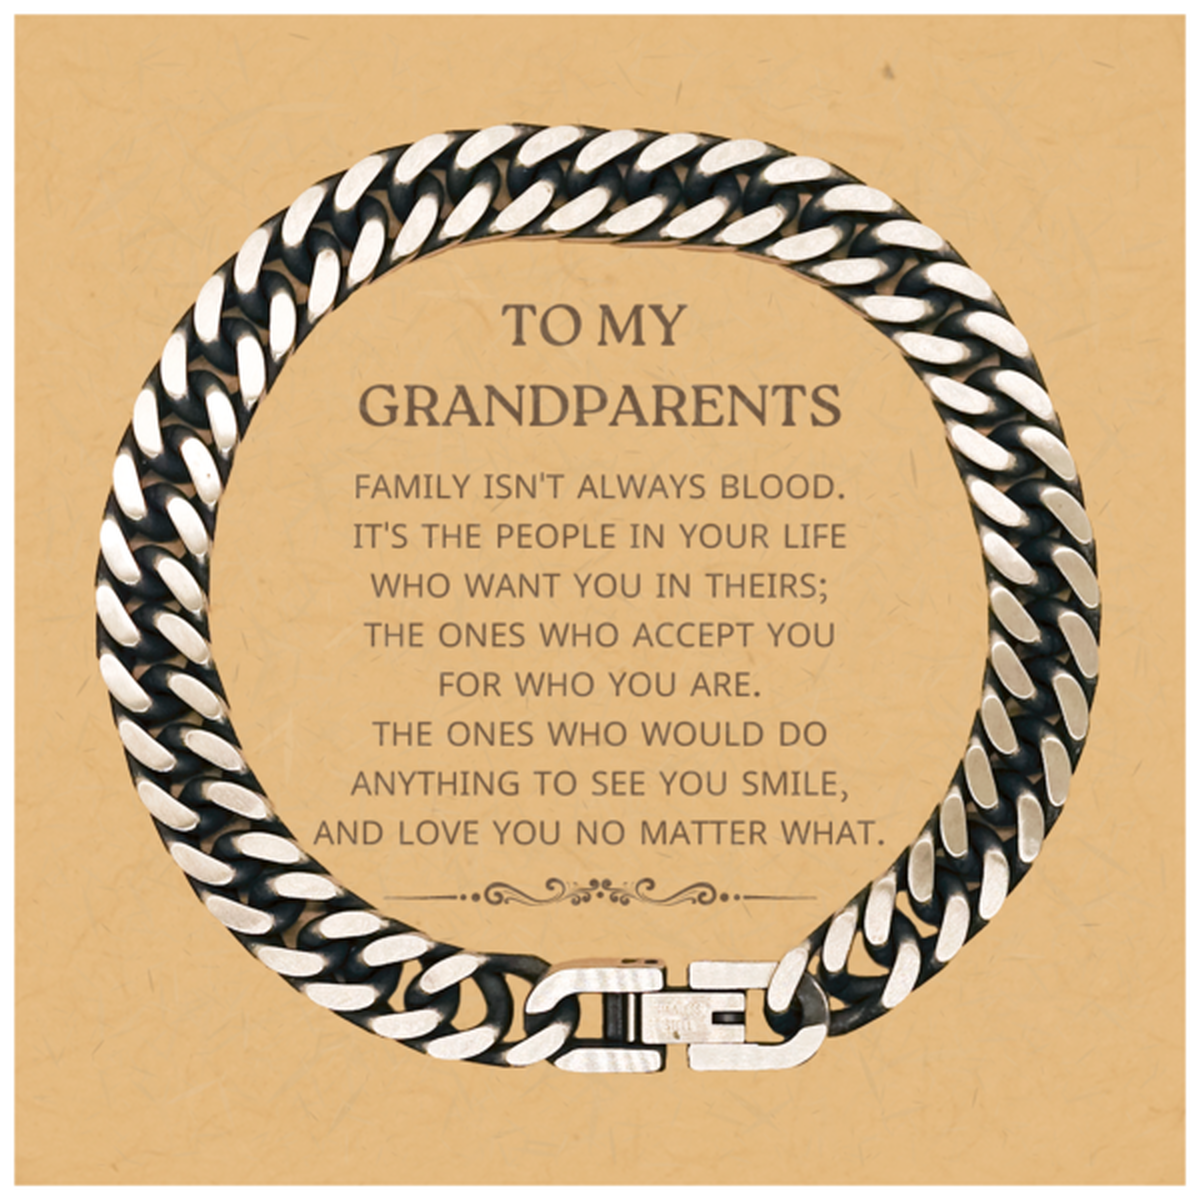 To My Grandparents Gifts, Family isn't always blood, Grandparents Cuban Link Chain Bracelet, Birthday Christmas Unique Present For Grandparents